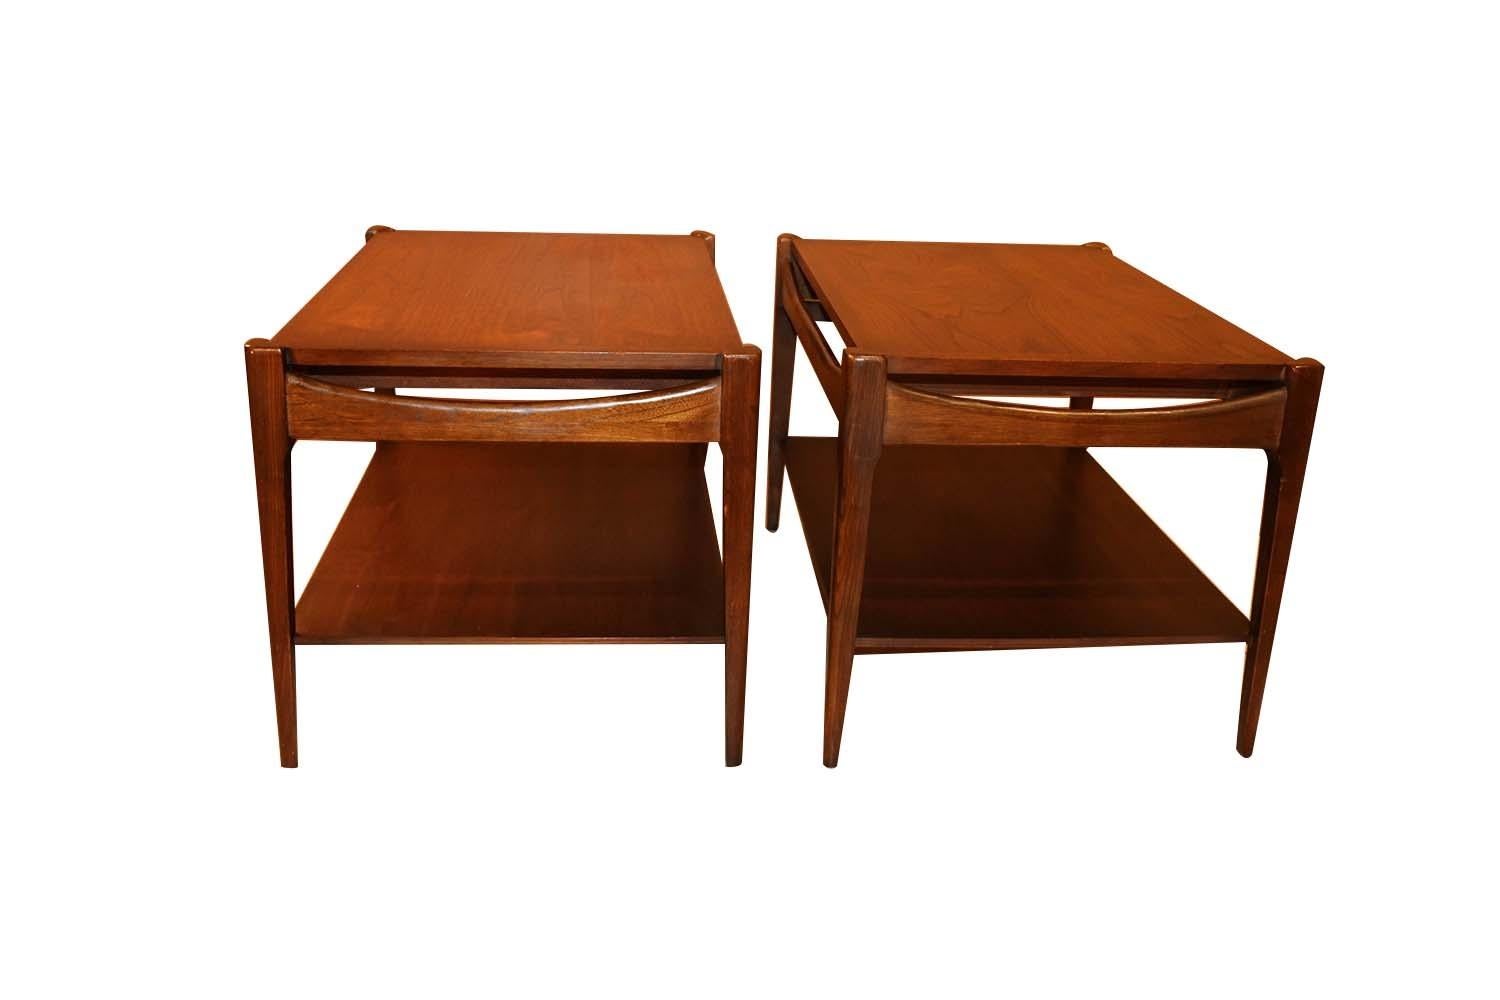 Pair of beautiful retro 1960s Danish style end side tables, impressive and sleek Mid-Century Modern “Artisan Collection” line tables by Bassett. The lines are clean and elegant. Tables are made of walnut. Finely tapered pencil legs hint to a